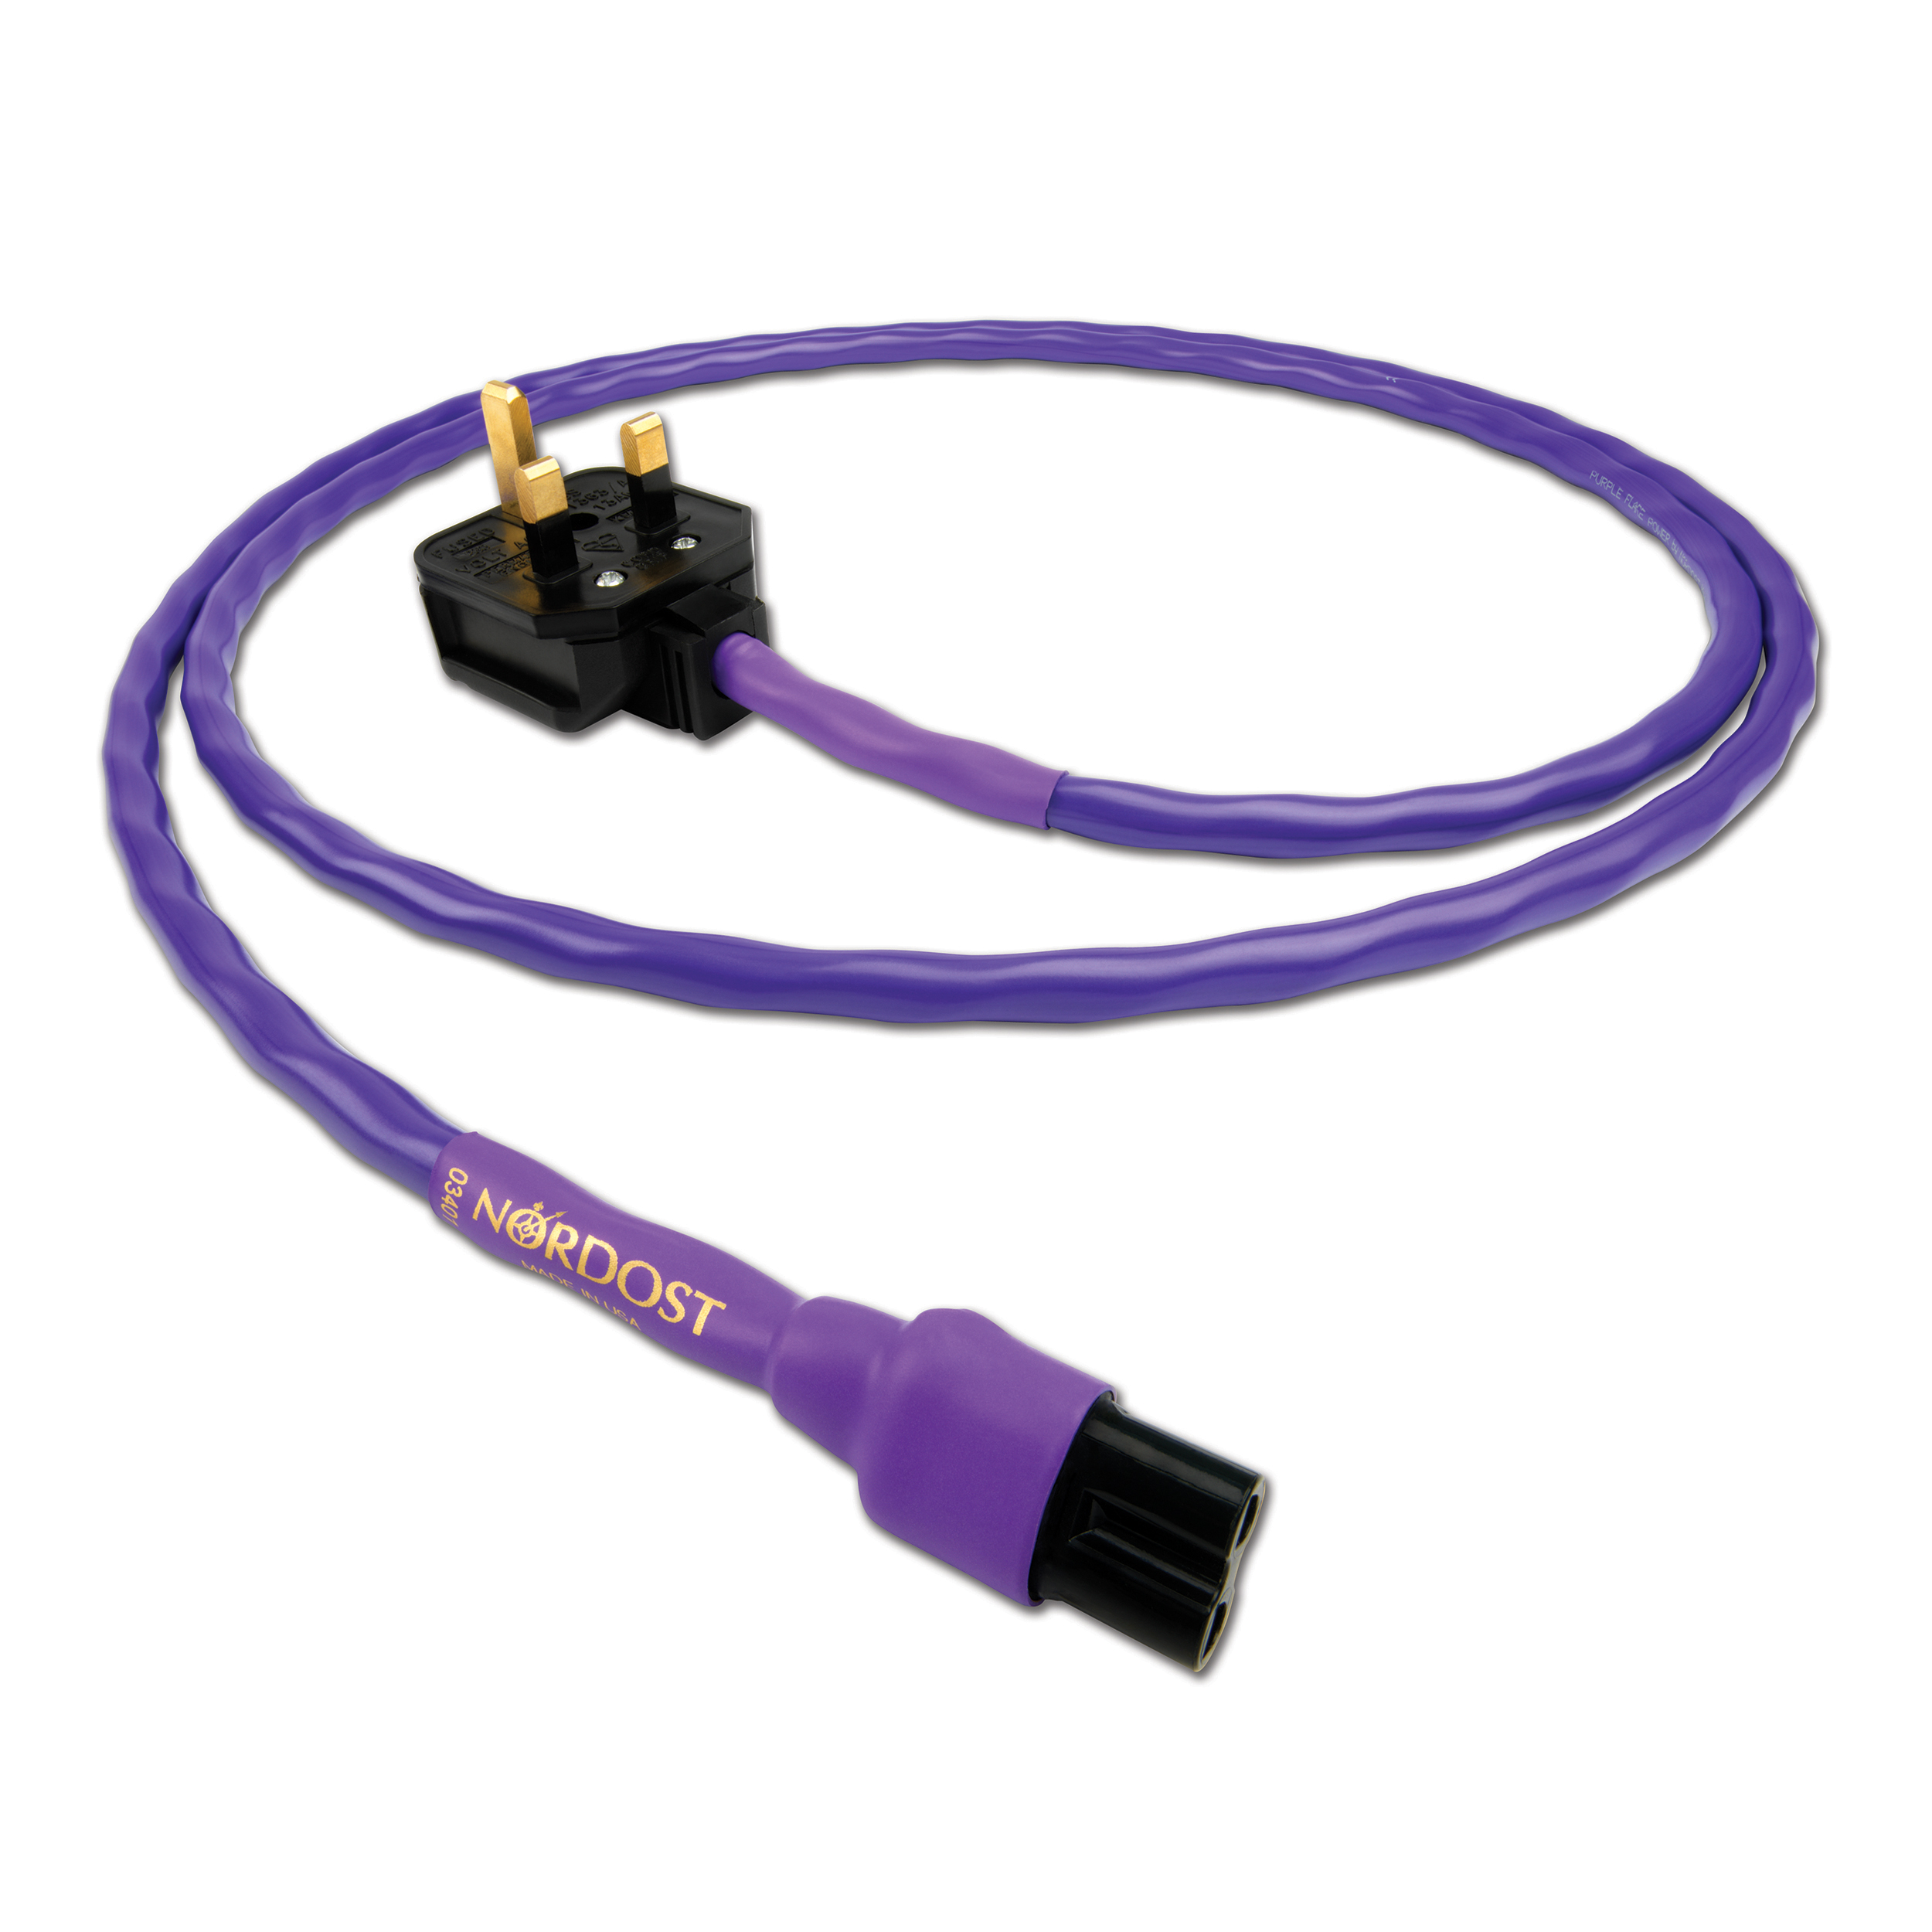 Nordost Purple Flare Power cord (fig 8)